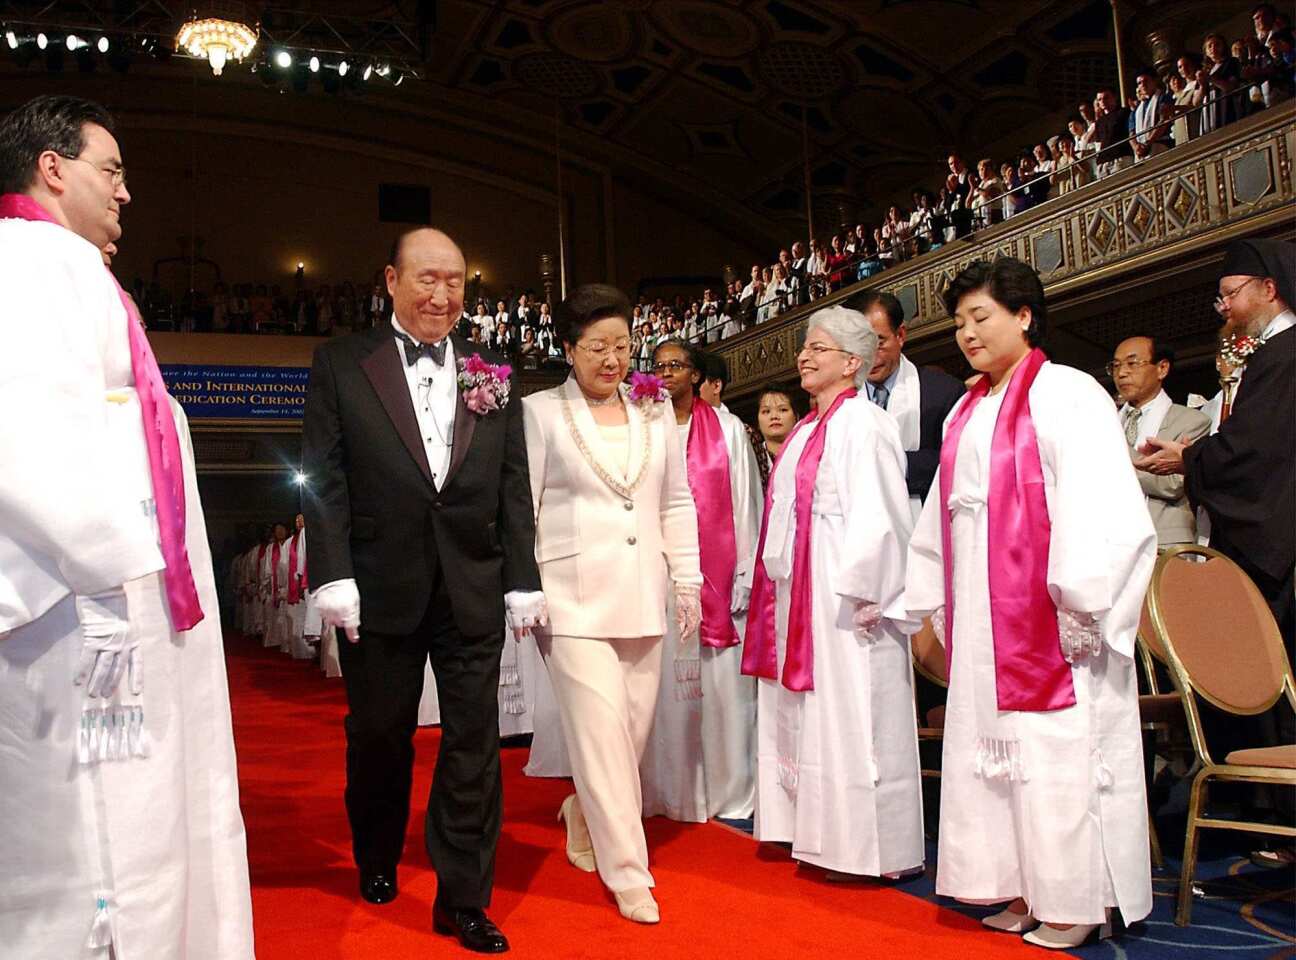 The Rev. Sun Myung Moon and his wife, Hak Ja Han, walk down a red carpet as they are introduced during the Affirmation of Vows part of the Interreligious and International Couple's Blessing and Rededication Ceremony at New York's Manhattan Center. About 500 to 600 couples participated in New York, and an estimated 21 million couples participated worldwide via a simulcast to 185 countries.